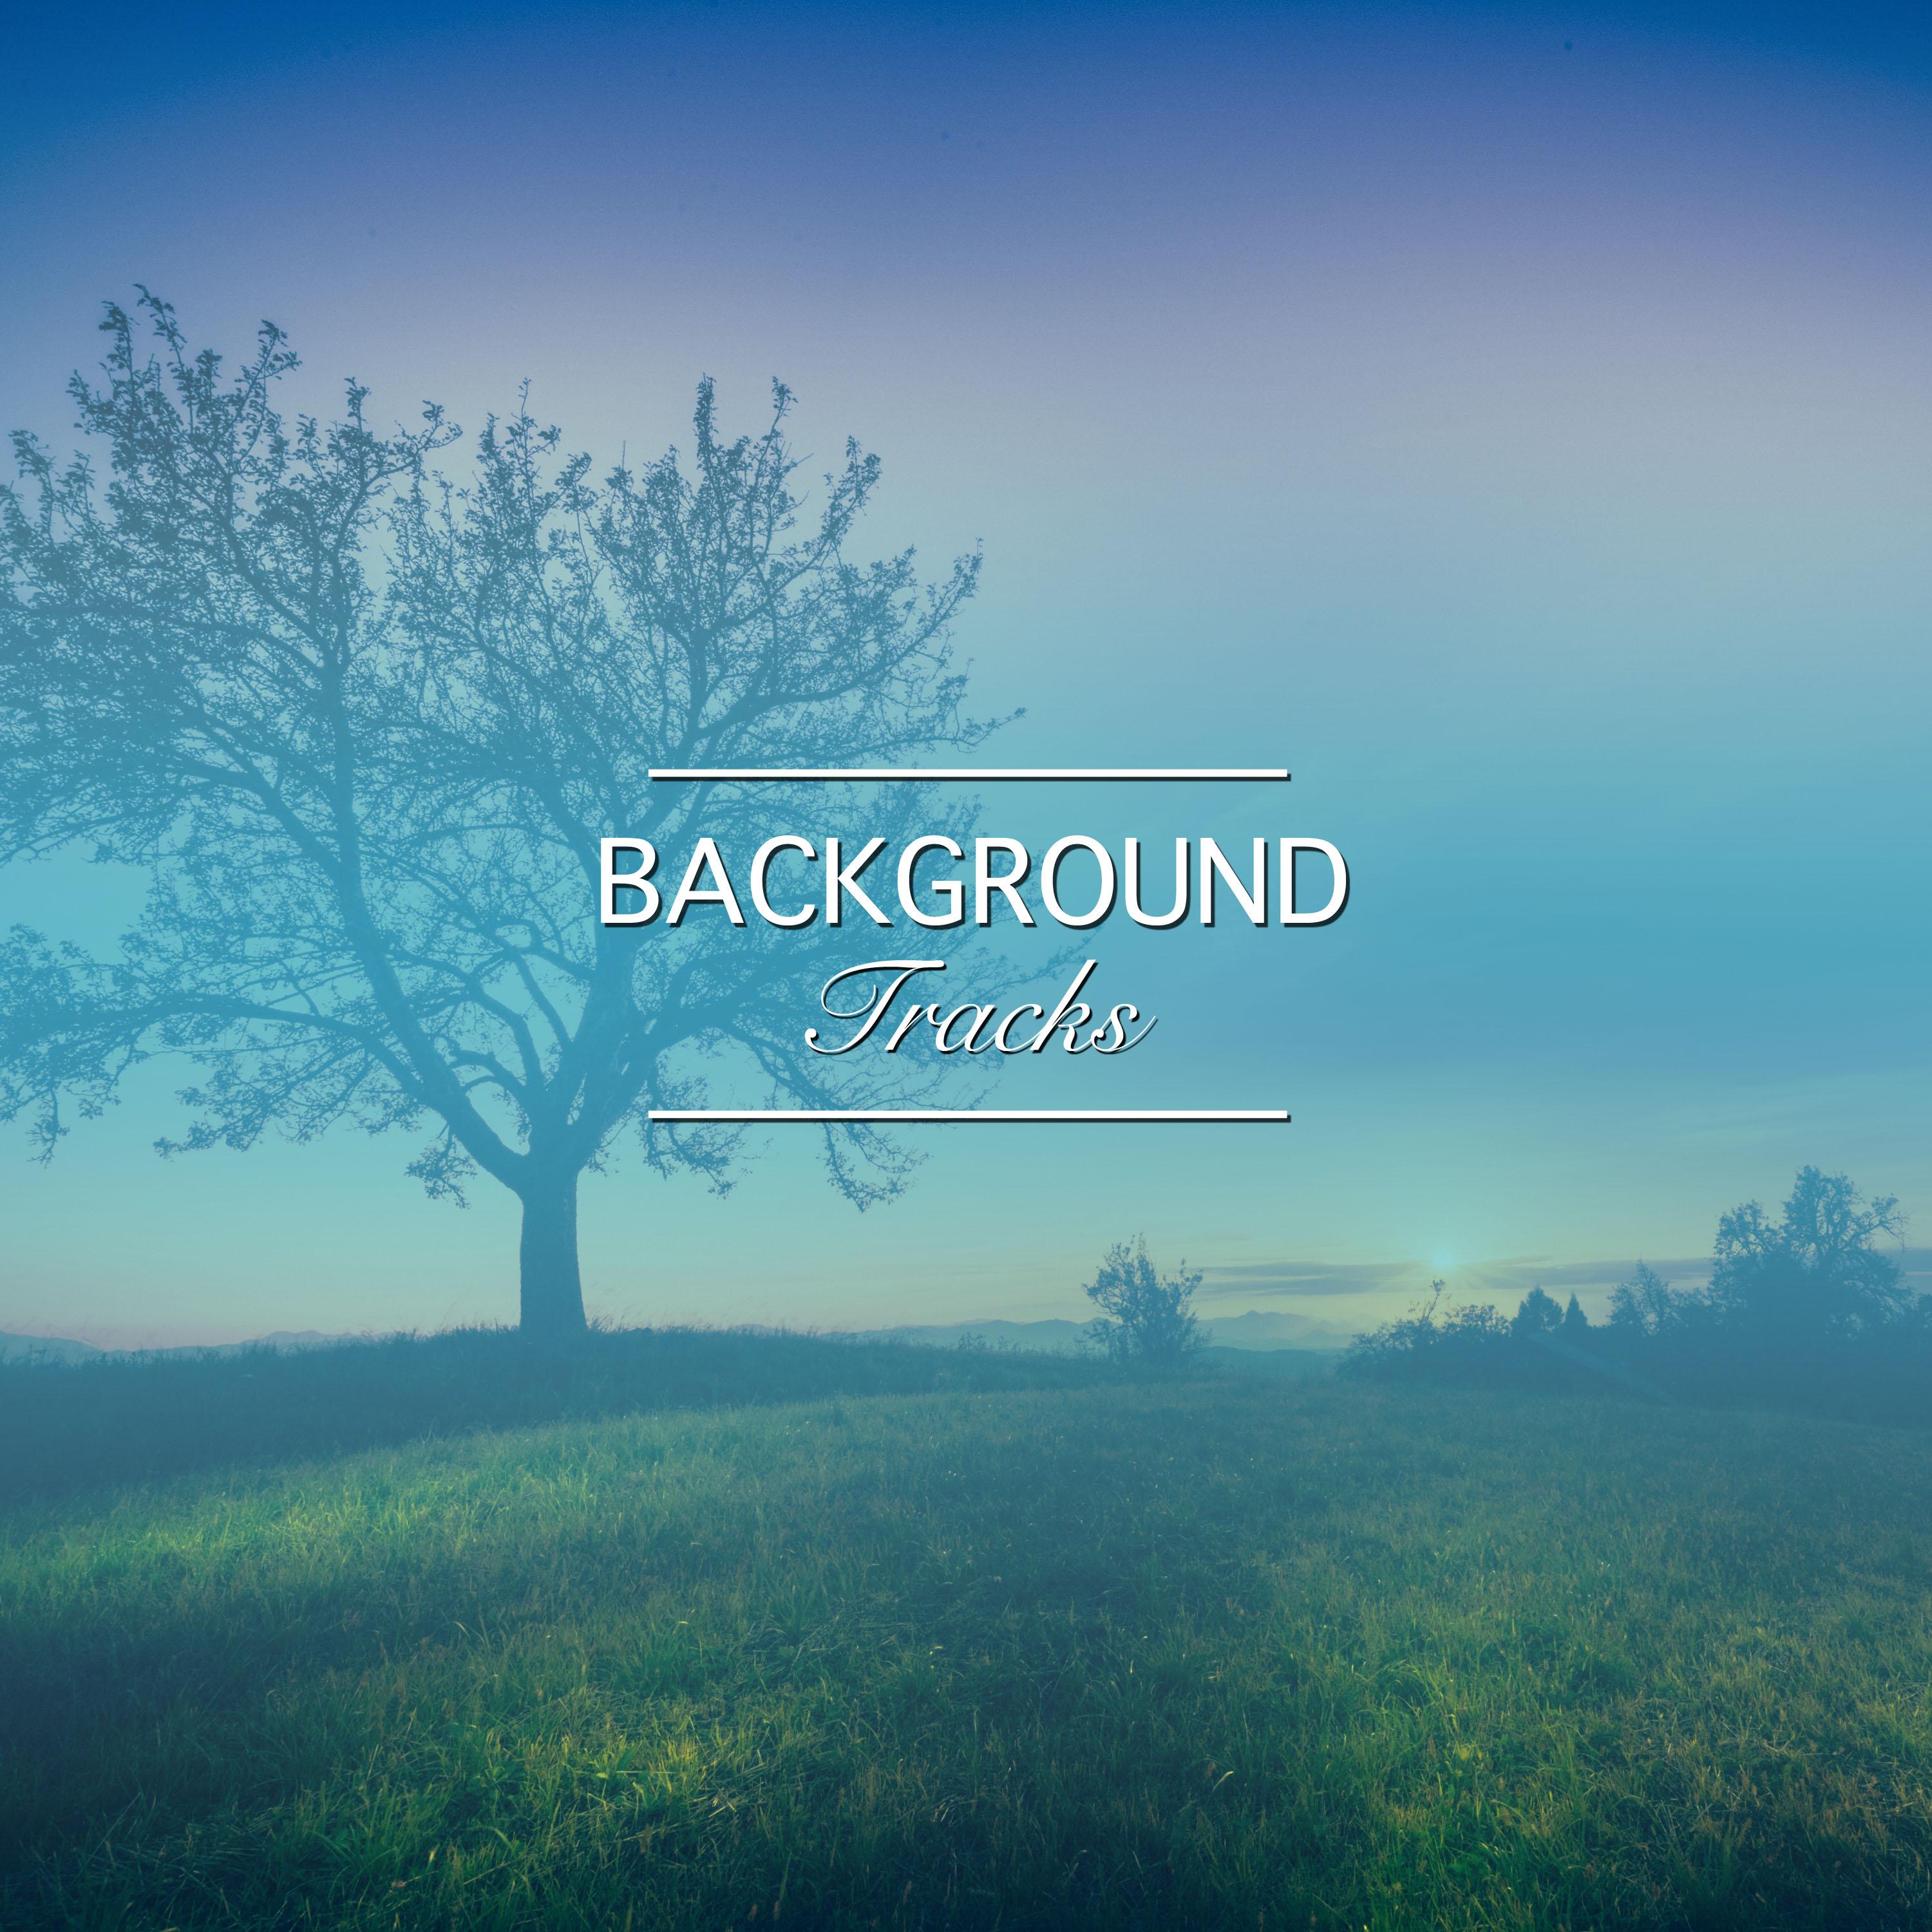 #1 Hour of Background Tracks for Meditation, Spa and Relaxation